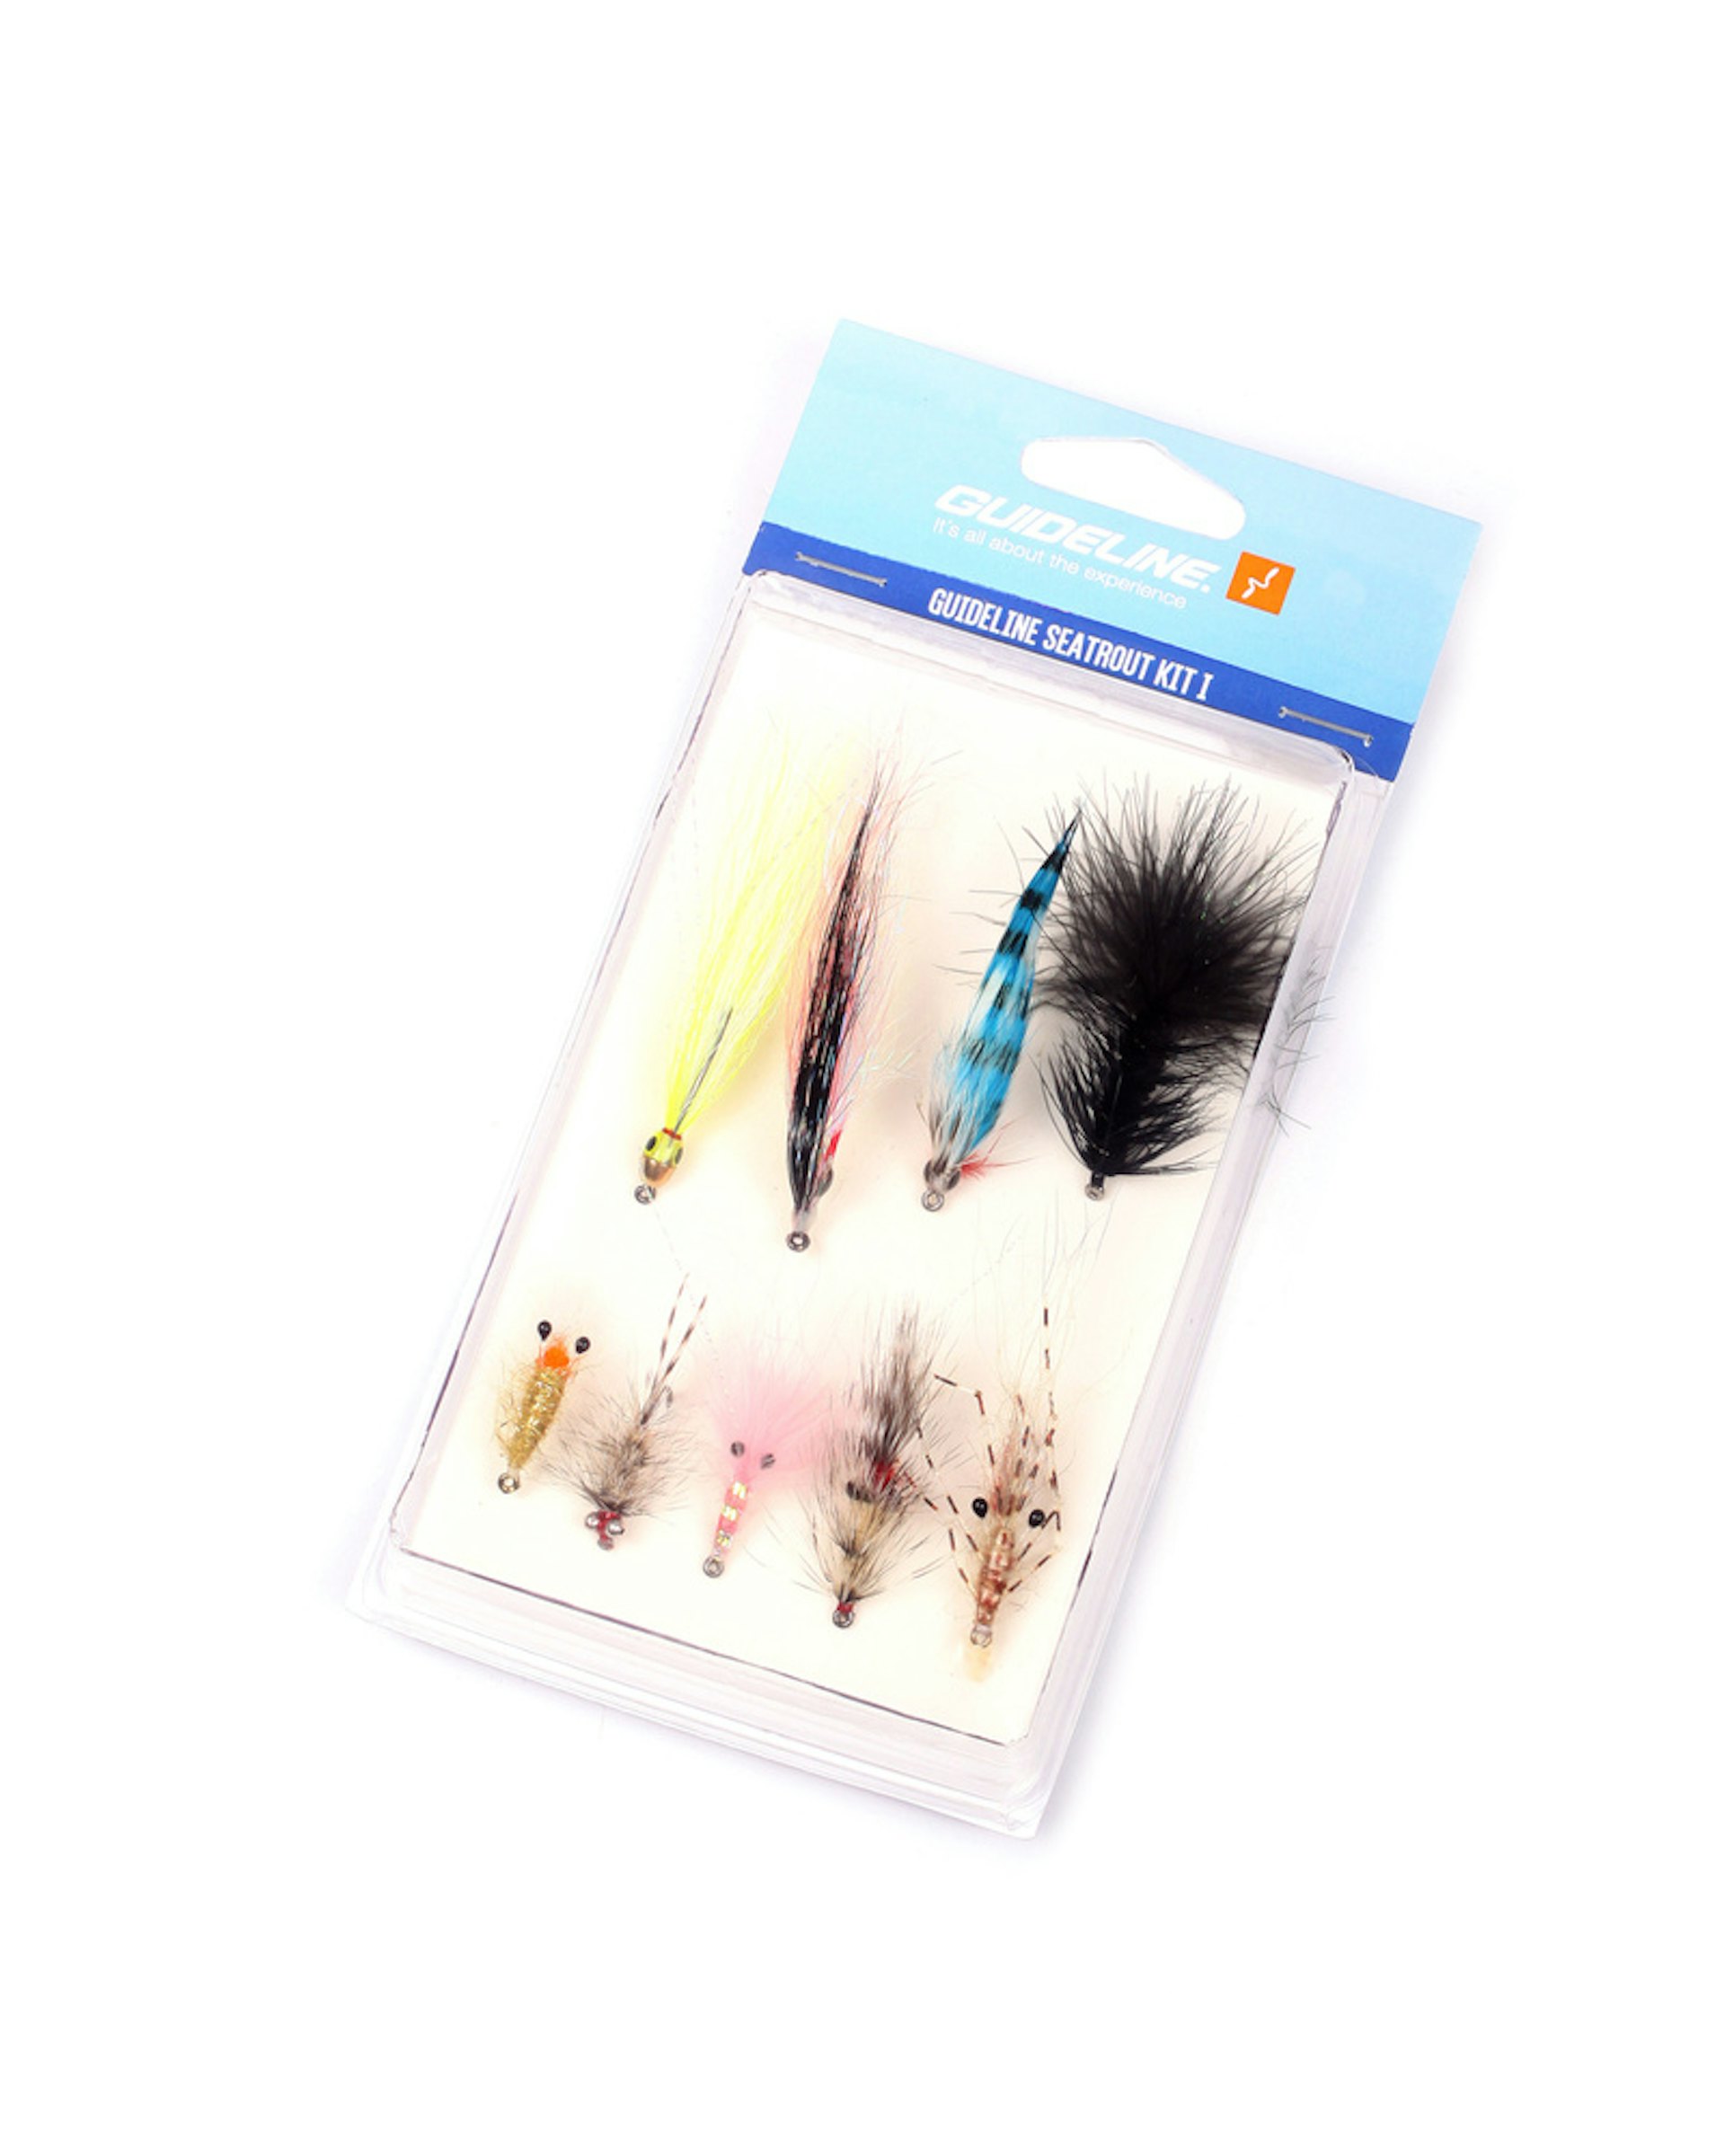 Fly Fishing Kits - Fly fishing kits for seatrout - Fly kits for salmon